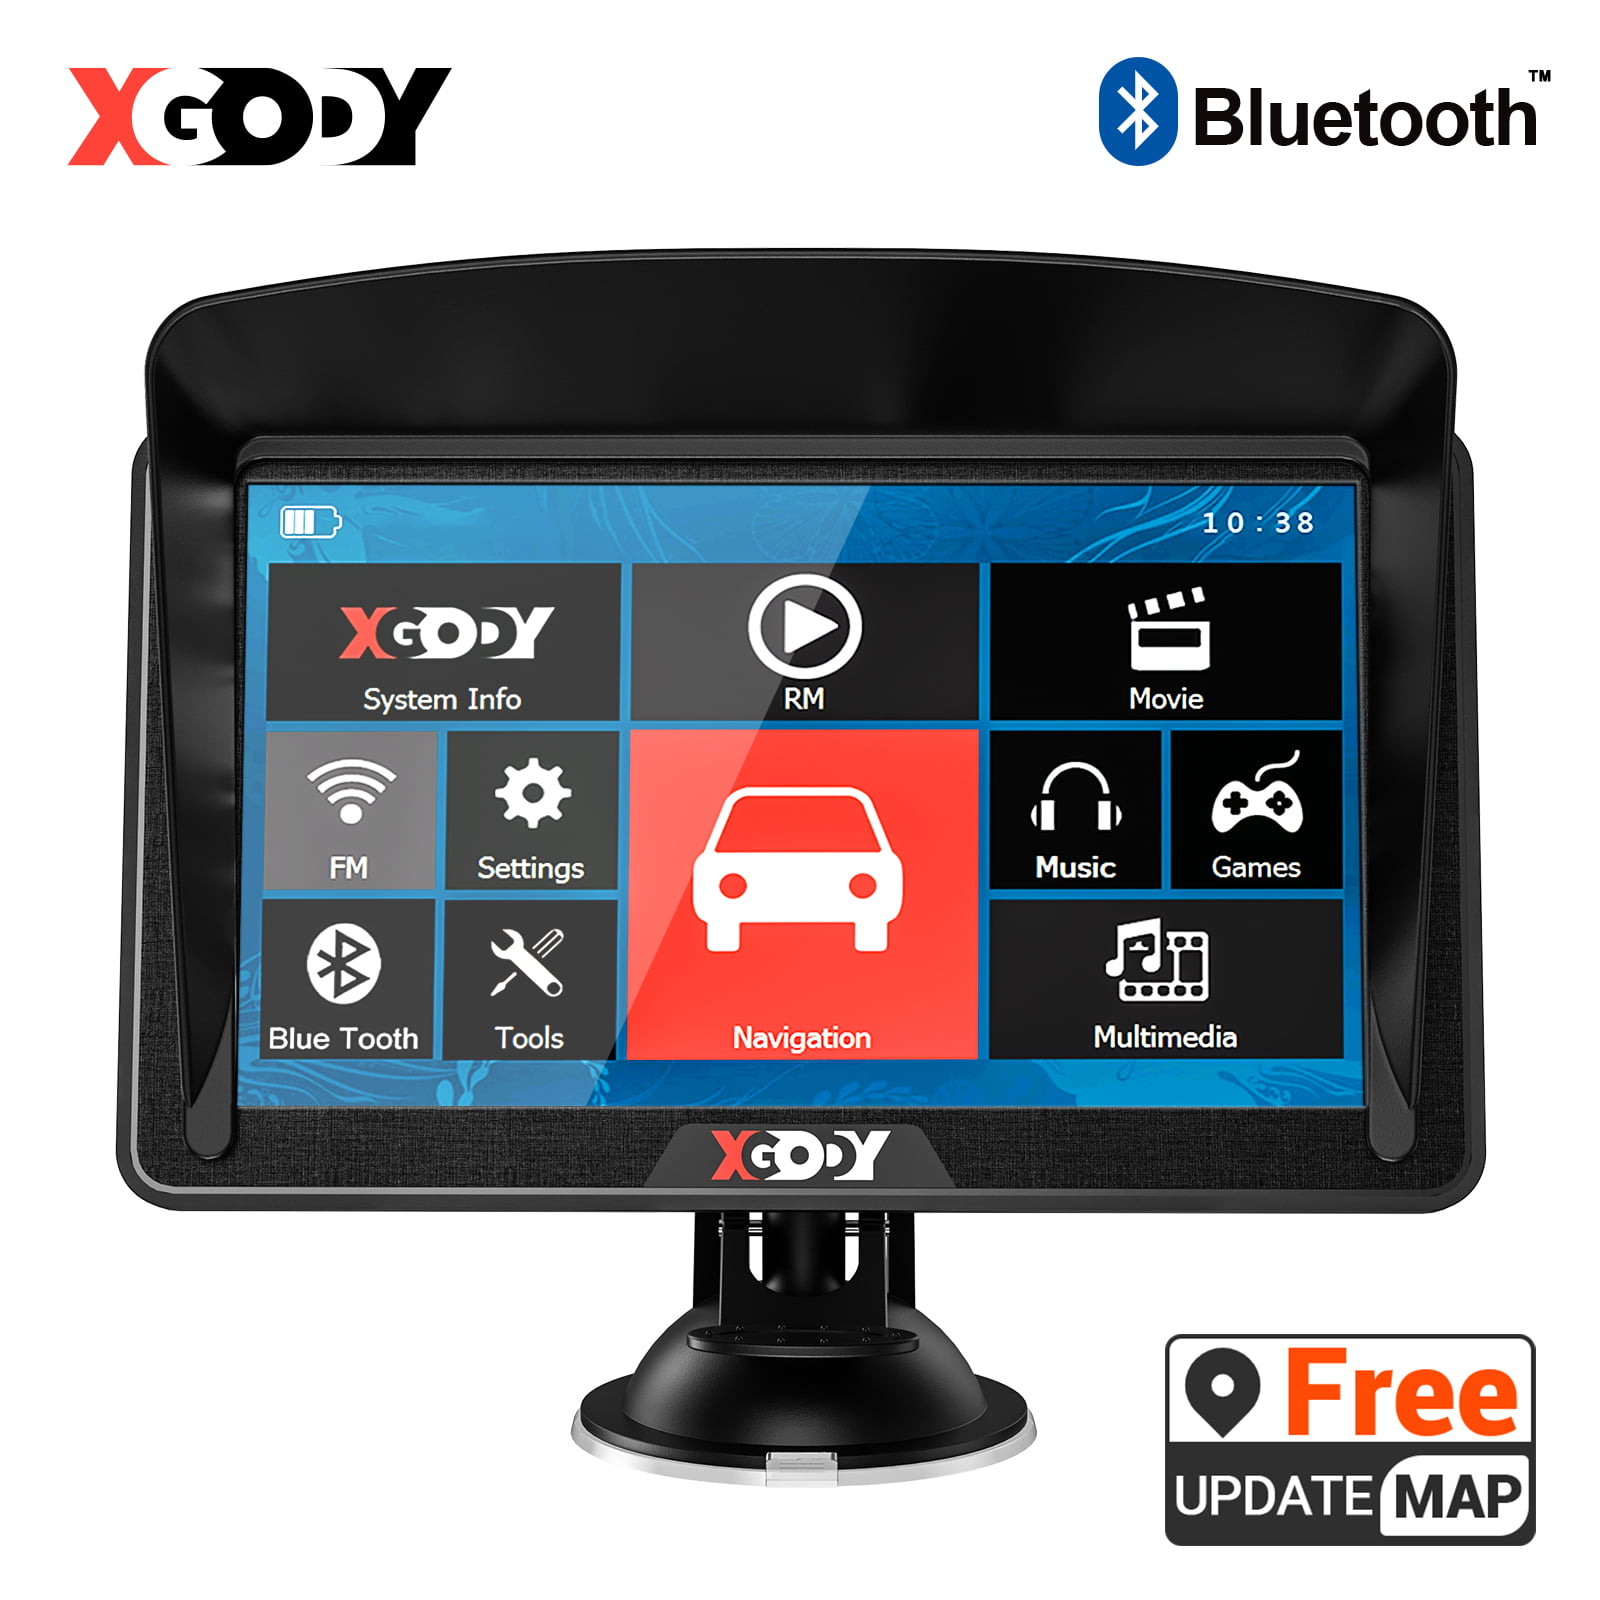 Xgody 7inch Truck GPS with Bluetooth AV-in Navigation System for Car Big Touchscreen GPS Navigator 8GB 256M with Voice Guidance and Speed Camera Warning Auto GPS with Lifetime Free Map Update 